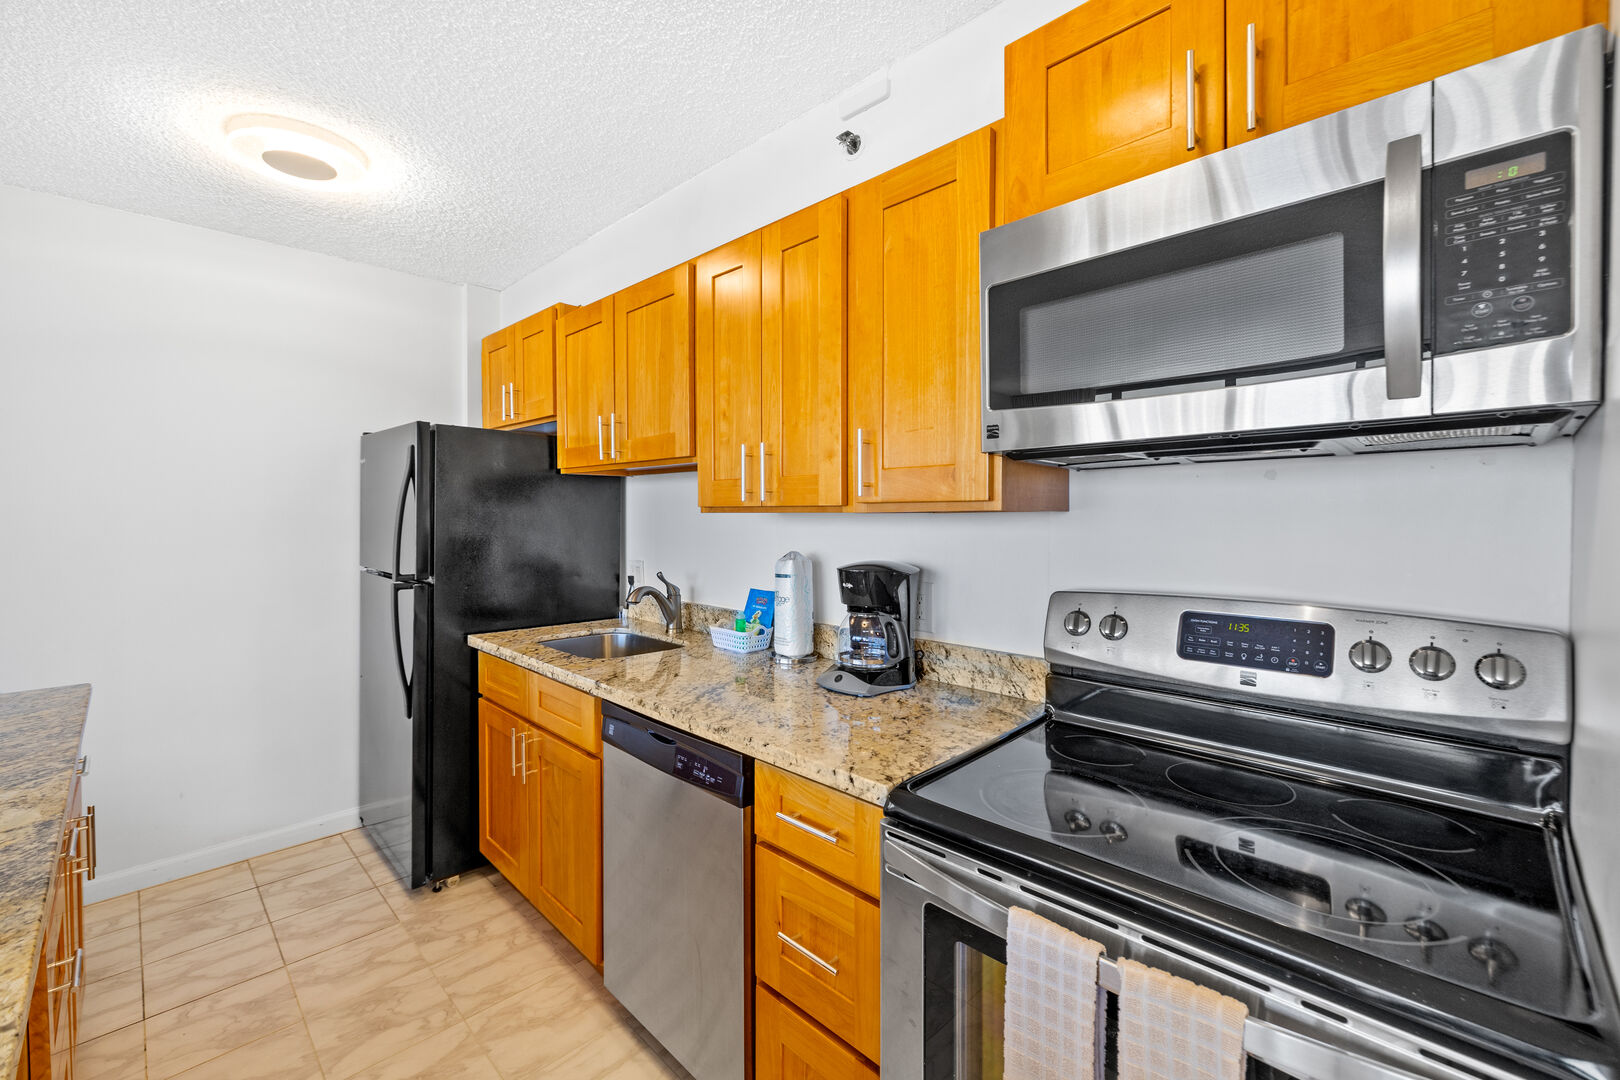 Fully equipped kitchen includes refrigerator, dish washer, stove, oven, and microwave